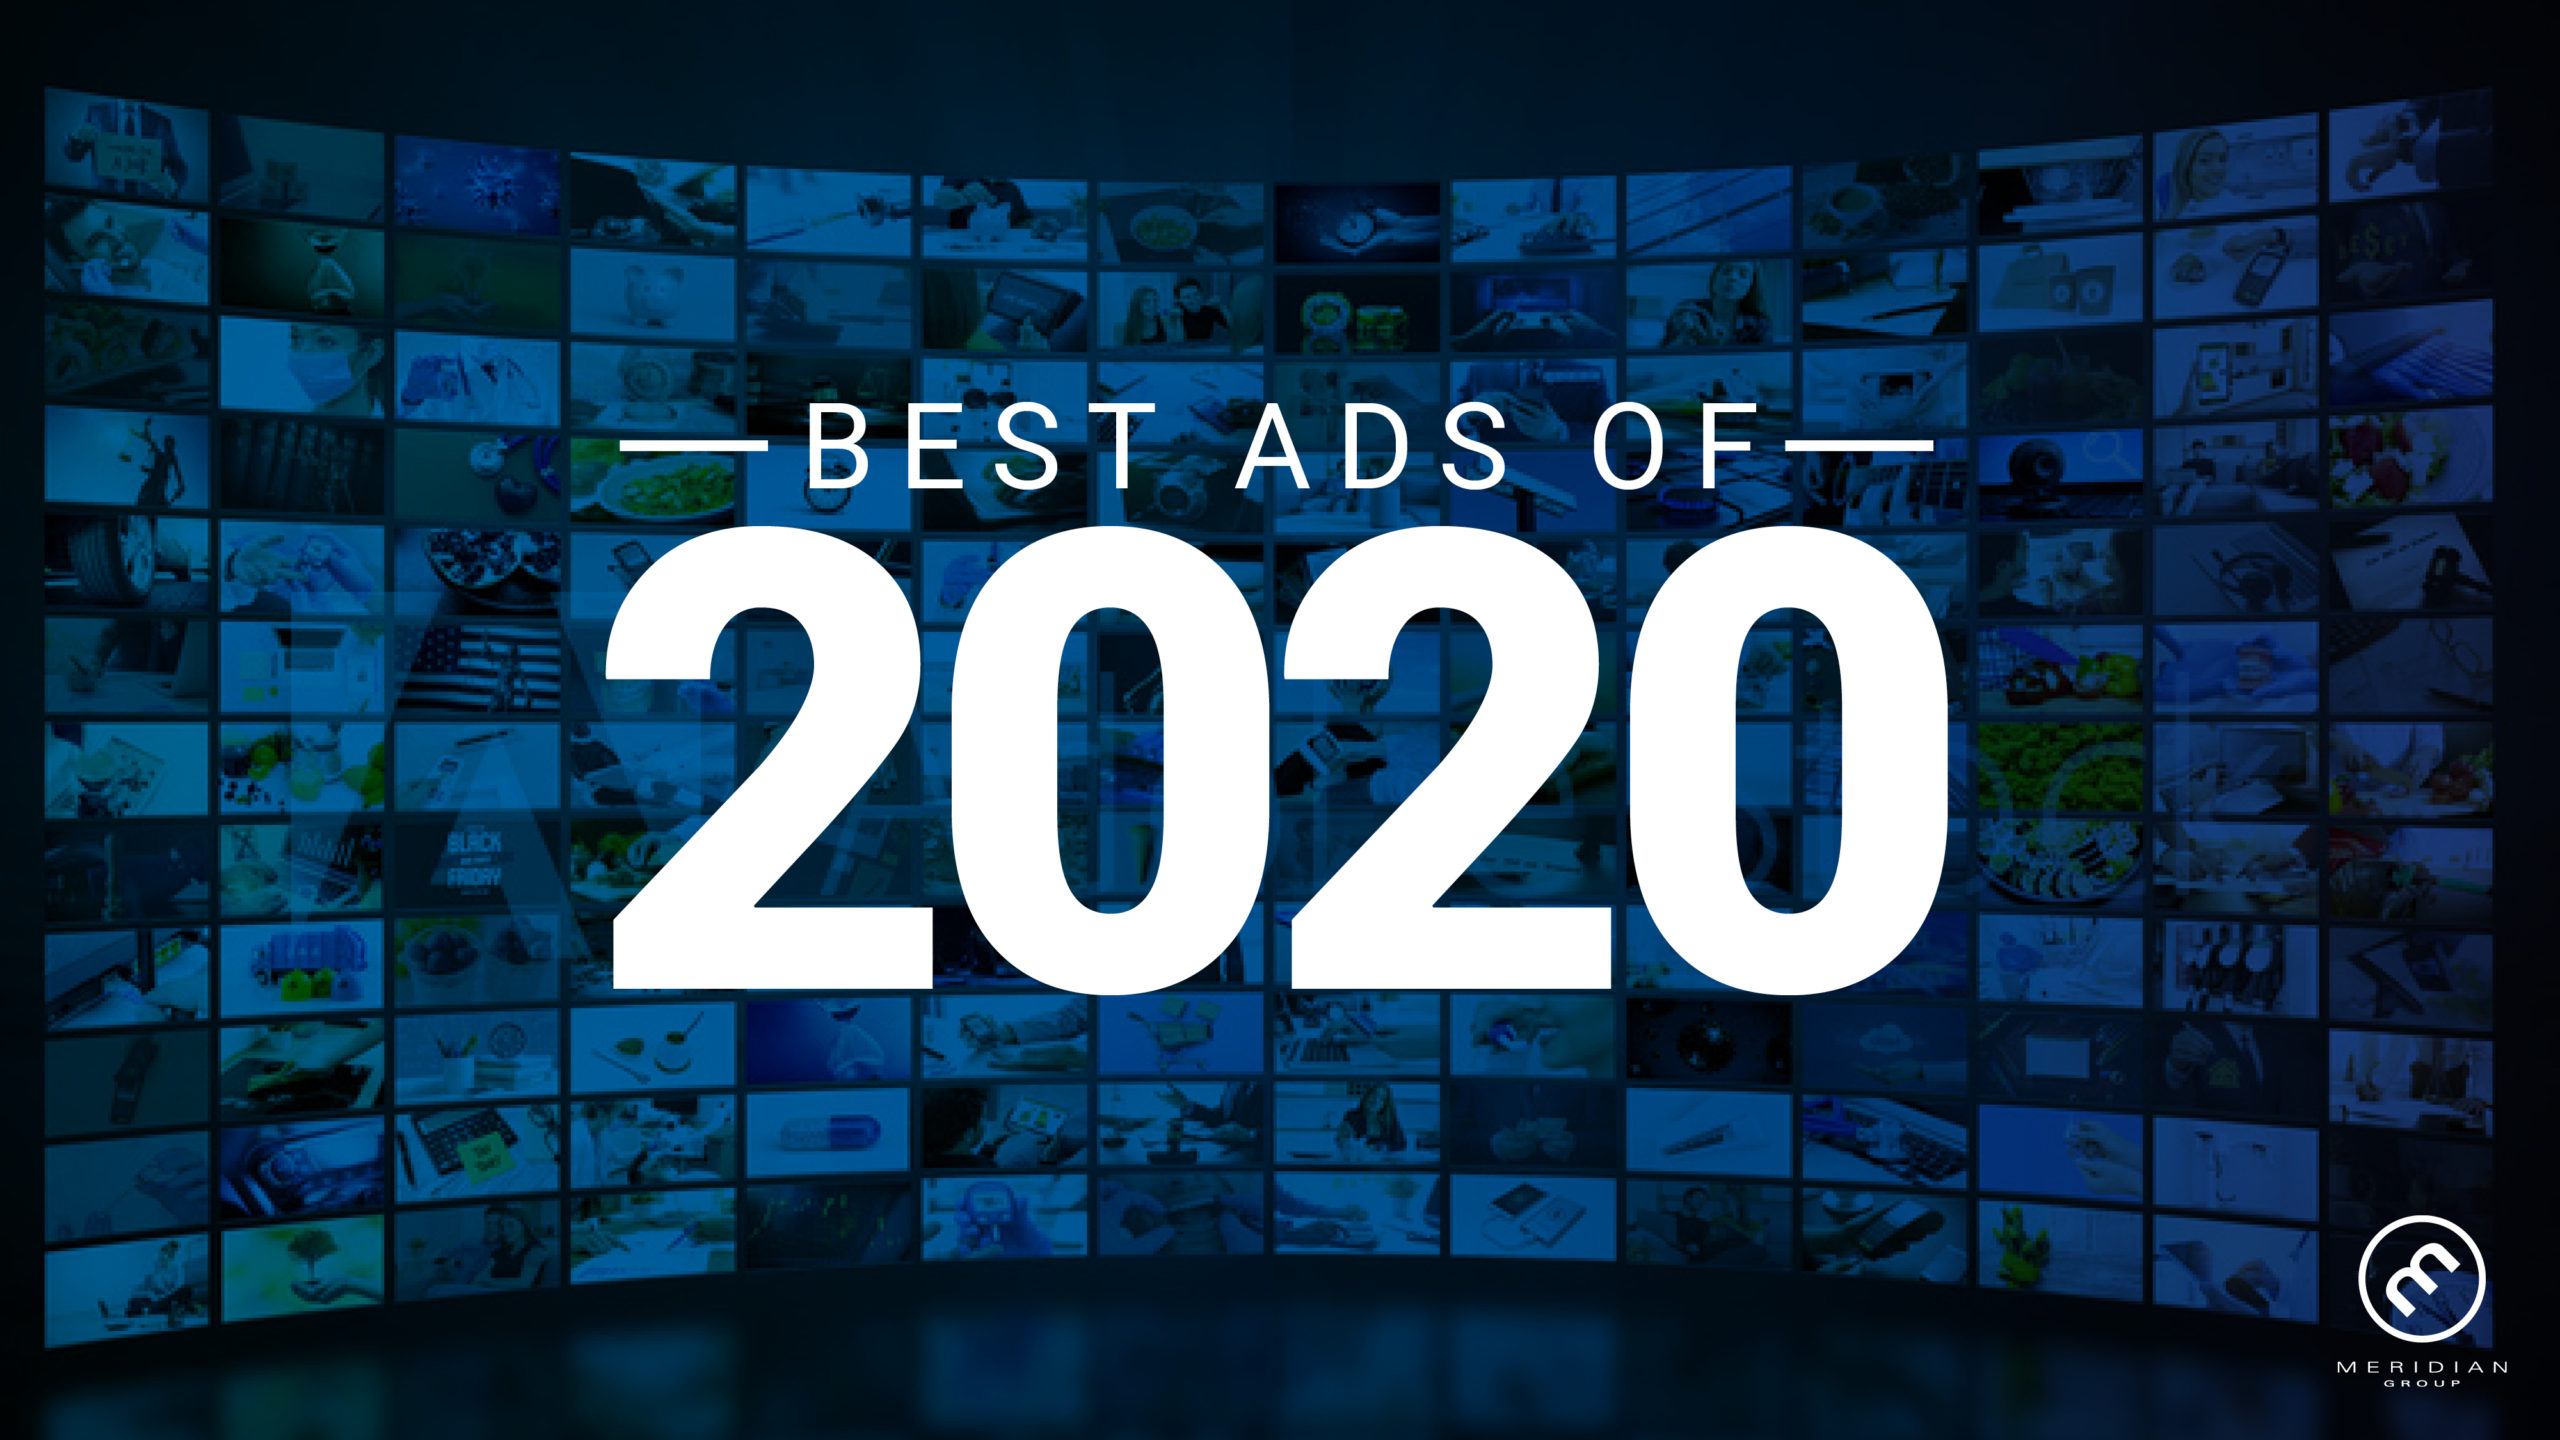 Best Ads of 2020 graphic